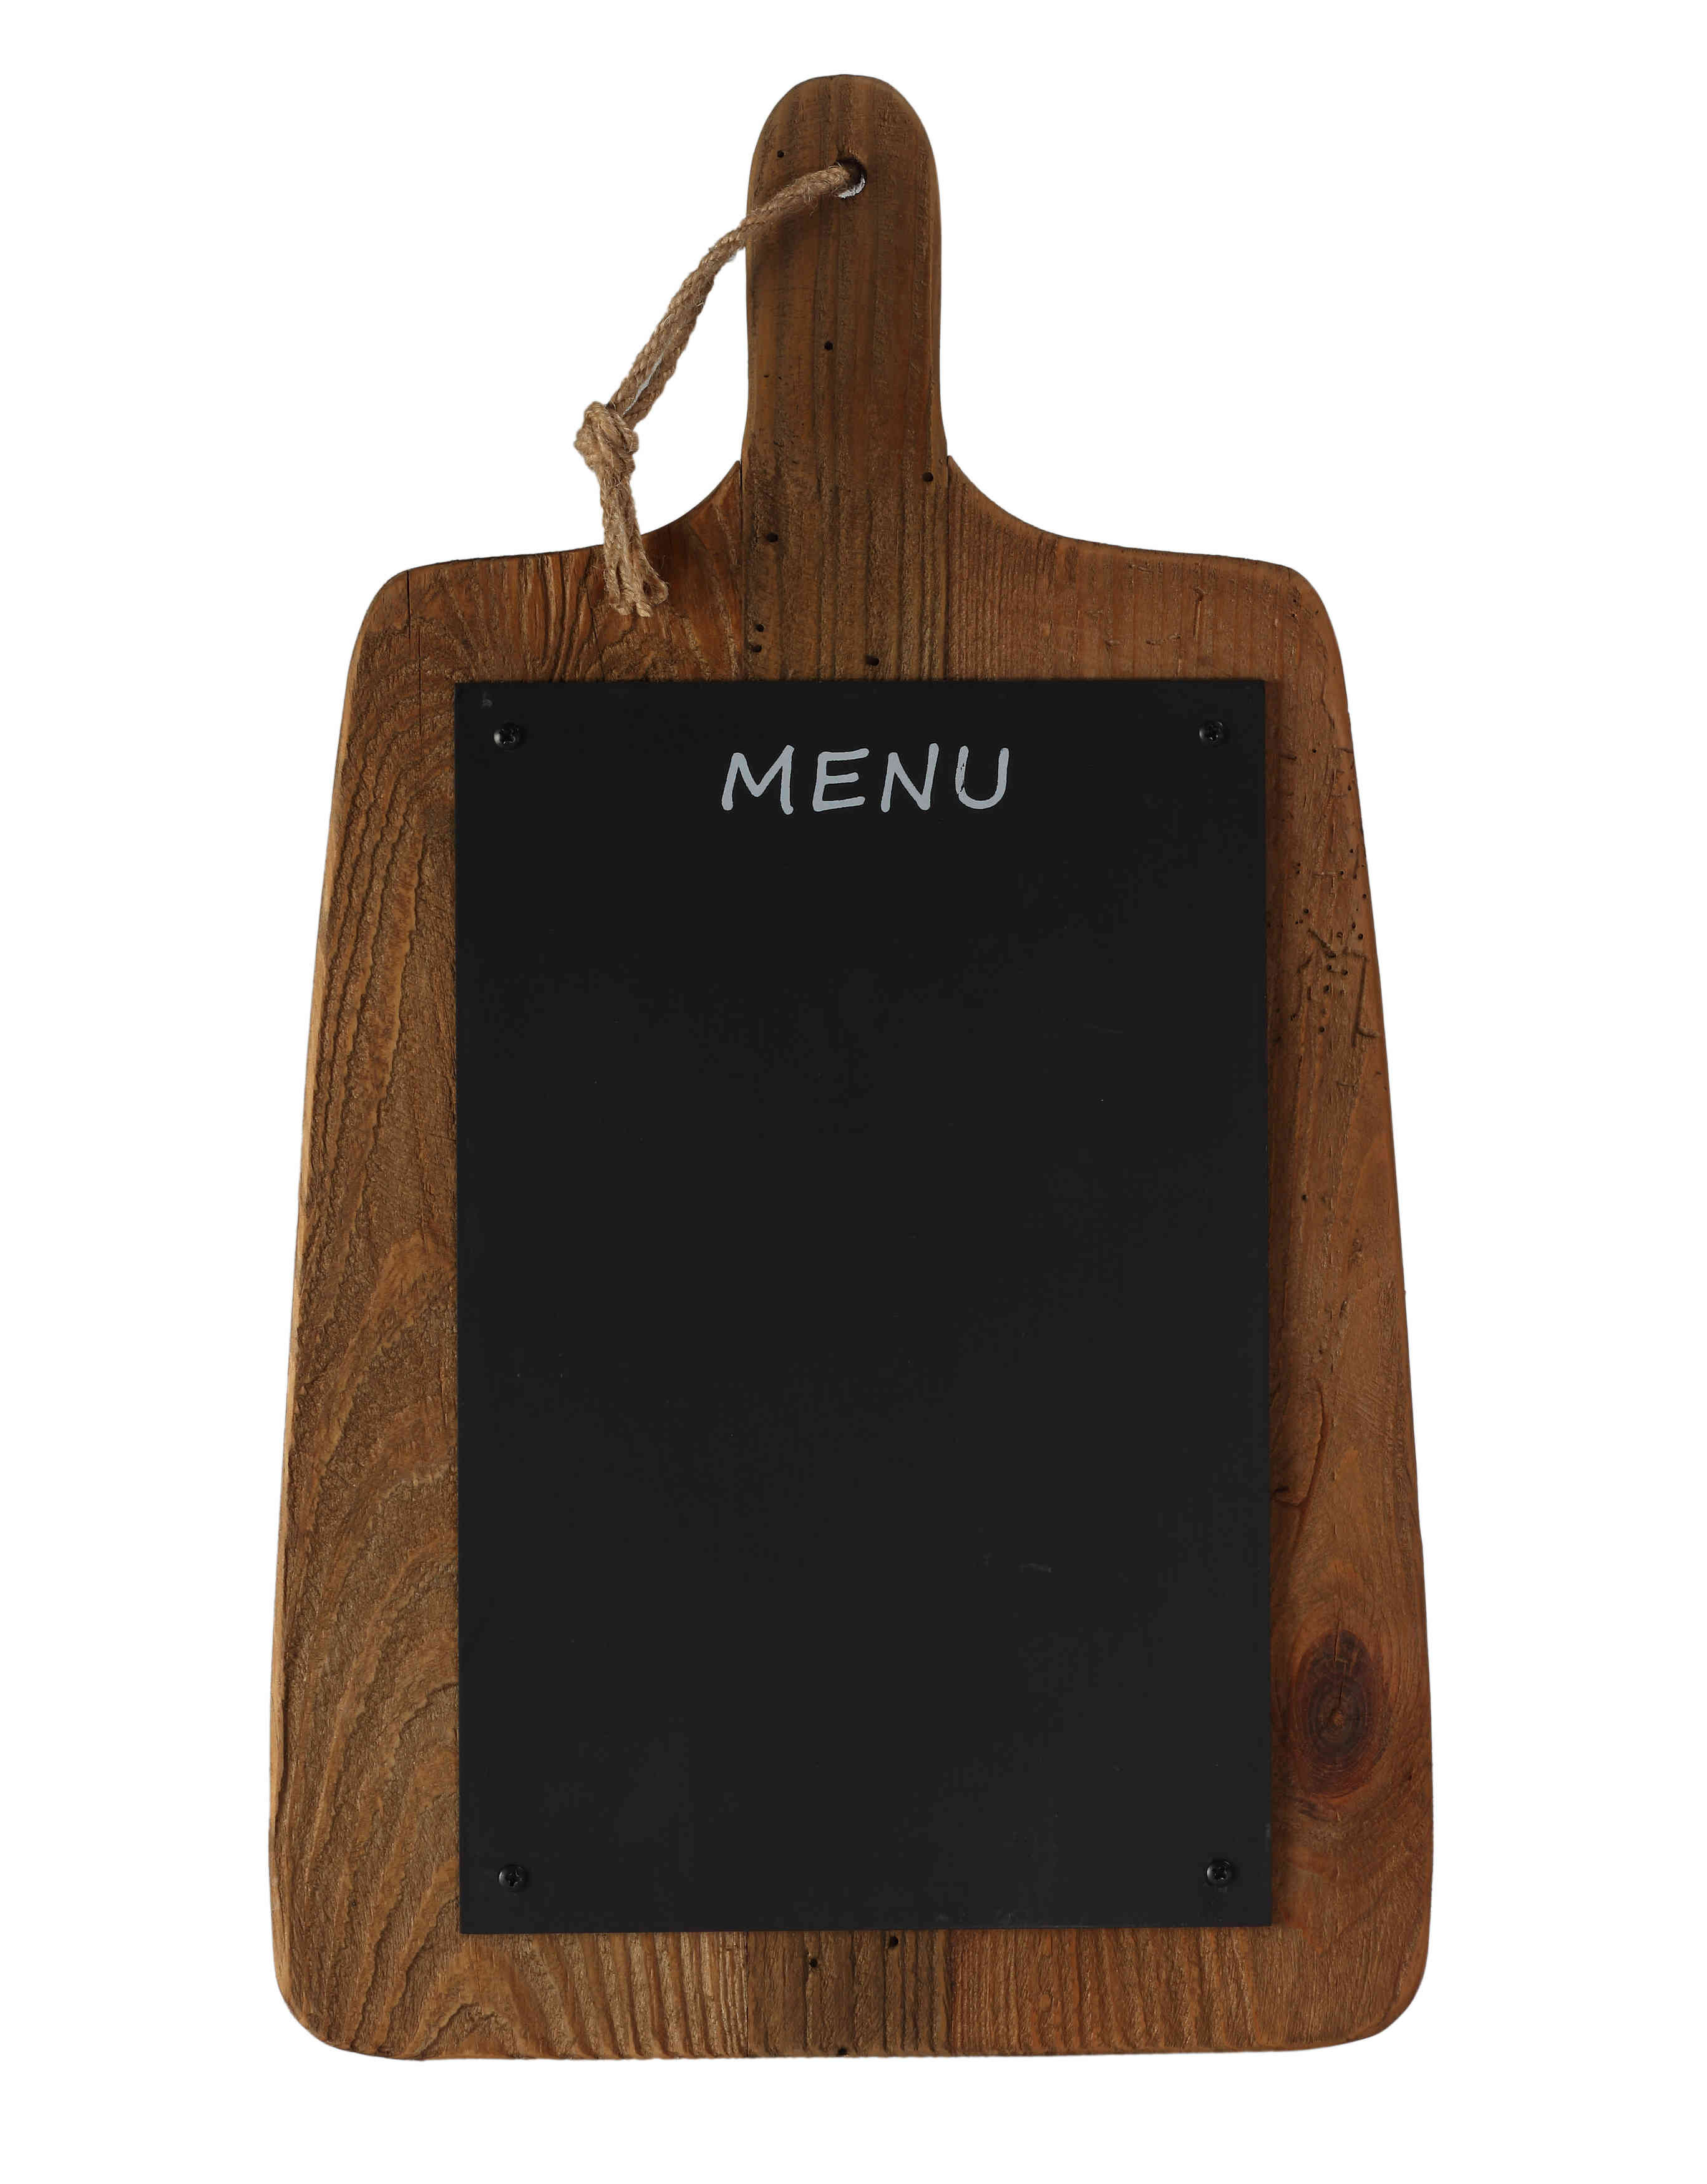 Union Rustic Solid Wood Free Standing Chalkboard